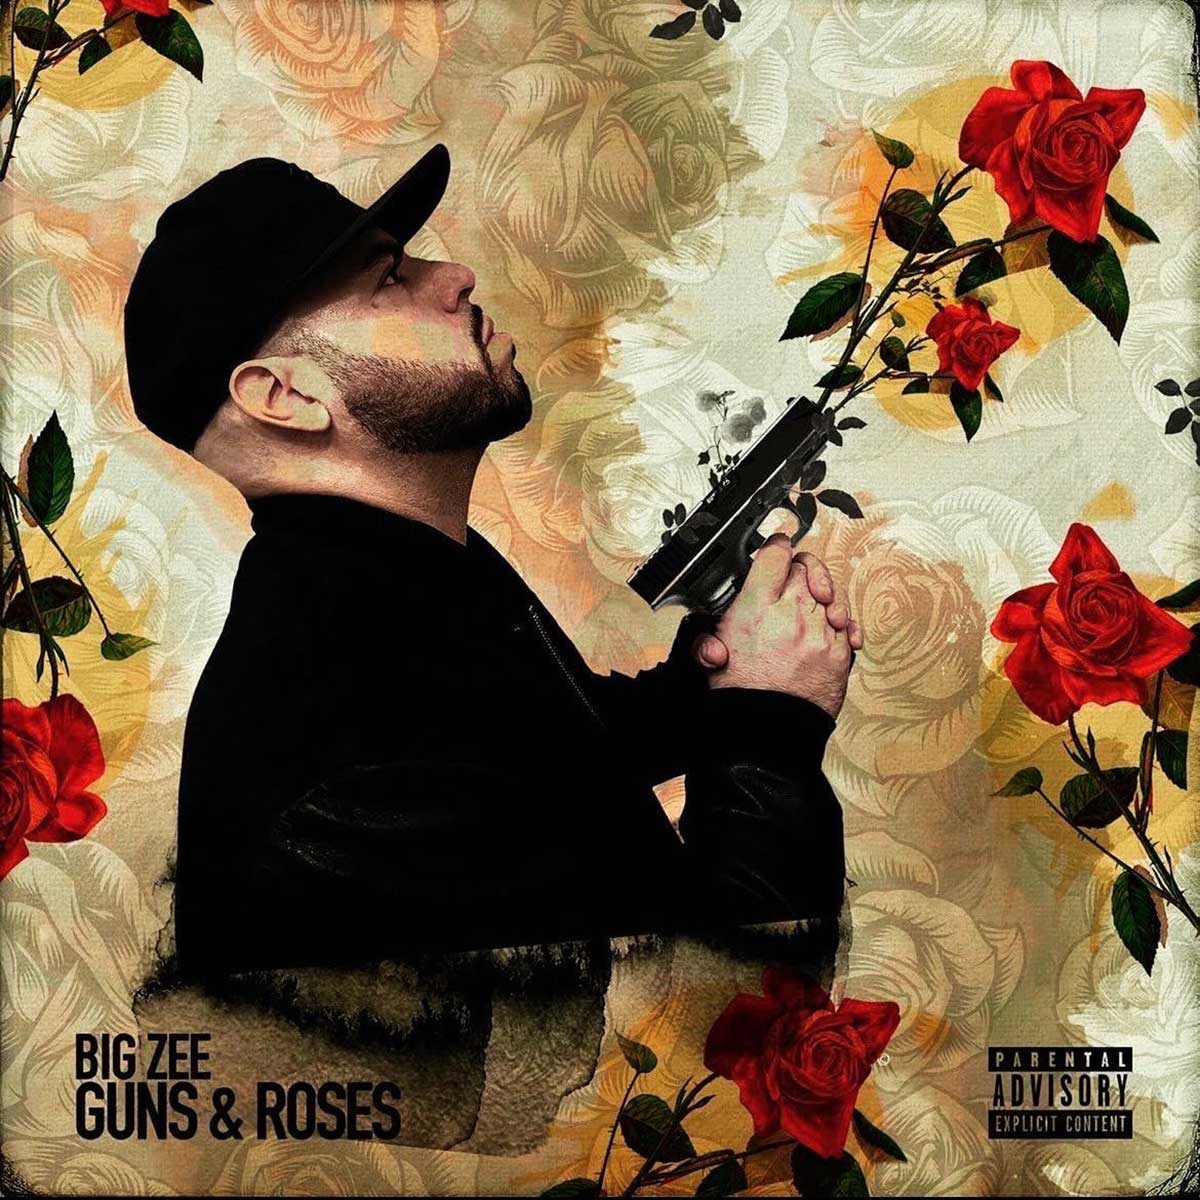 Artwork for Guns and Roses by Big Zee